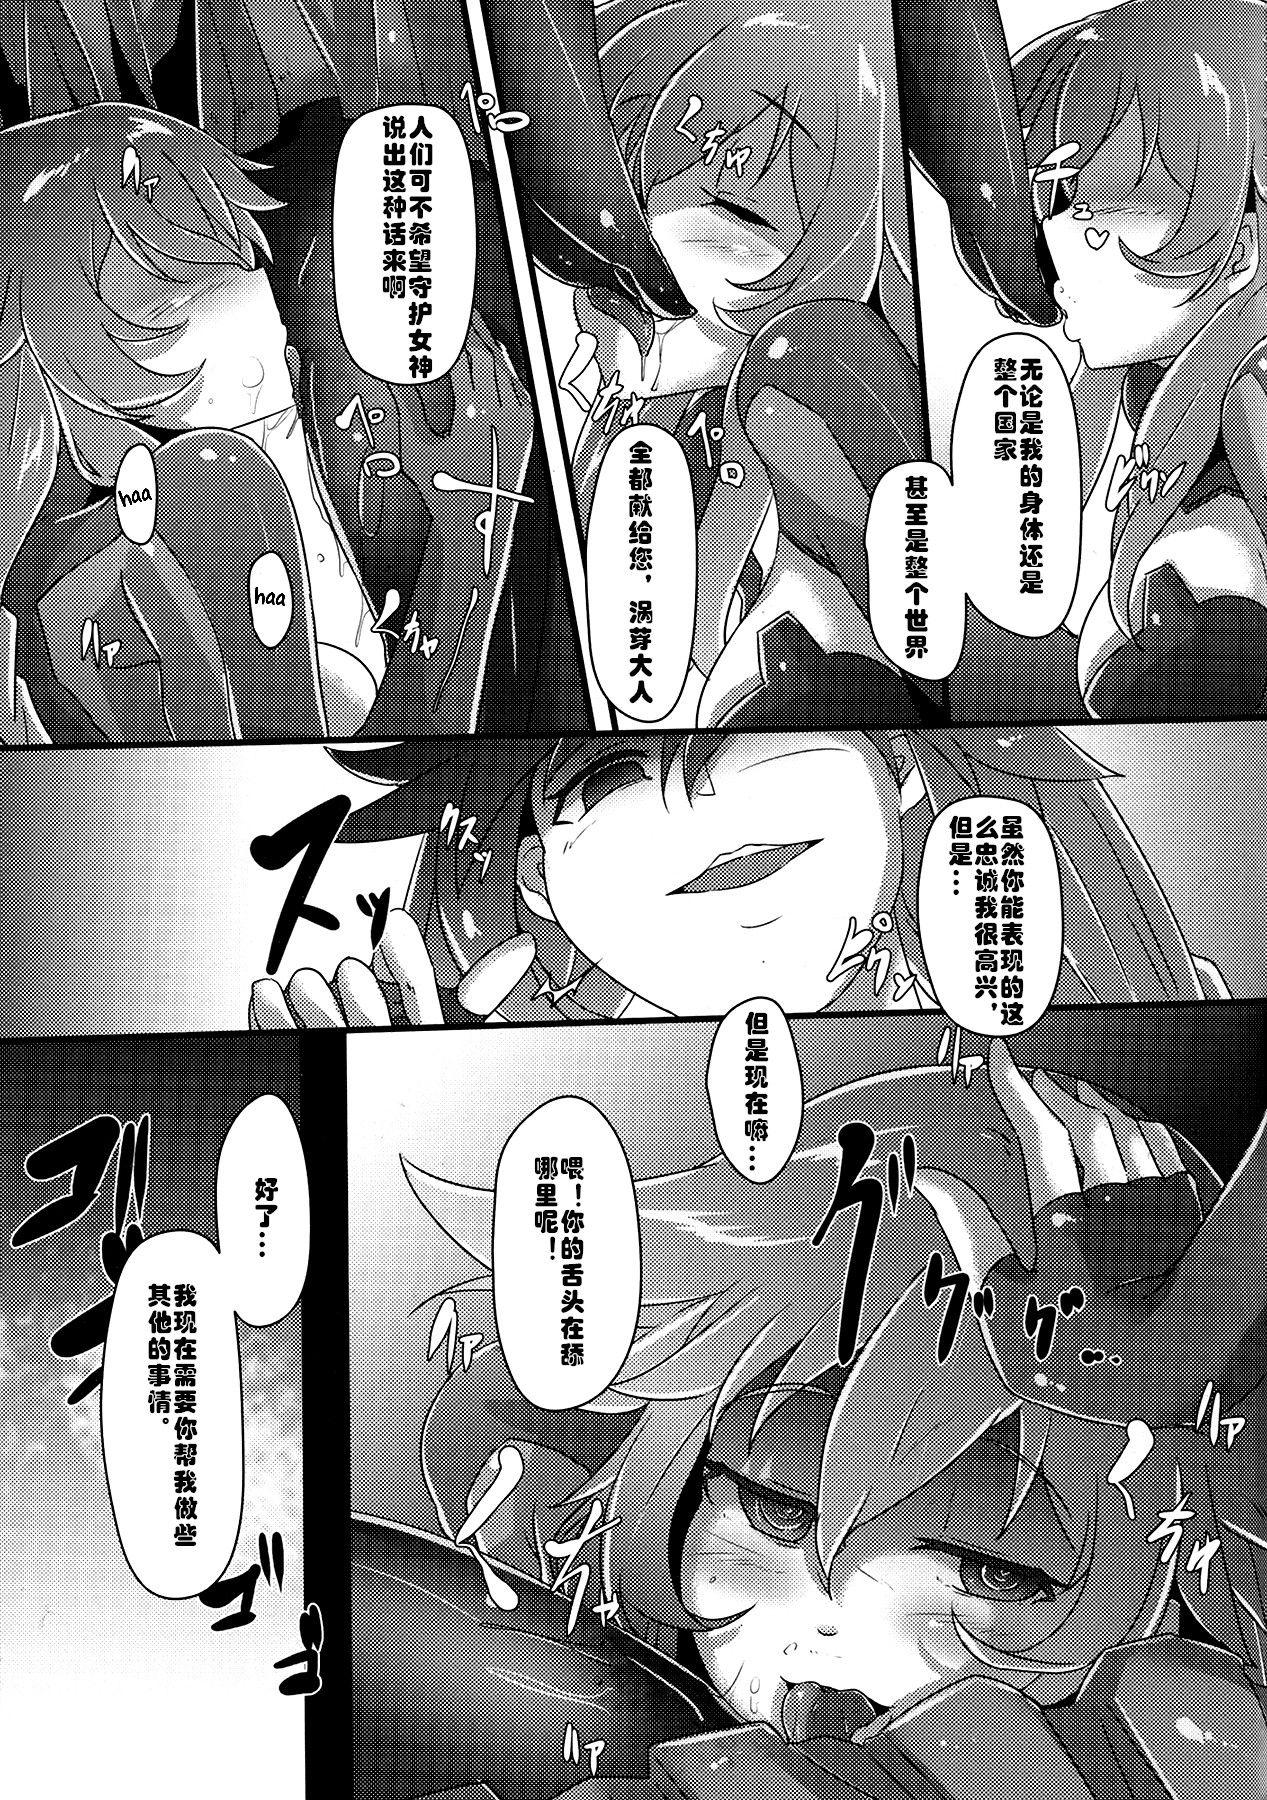 Price After the Nightmare - Hyperdimension neptunia Bang - Page 5